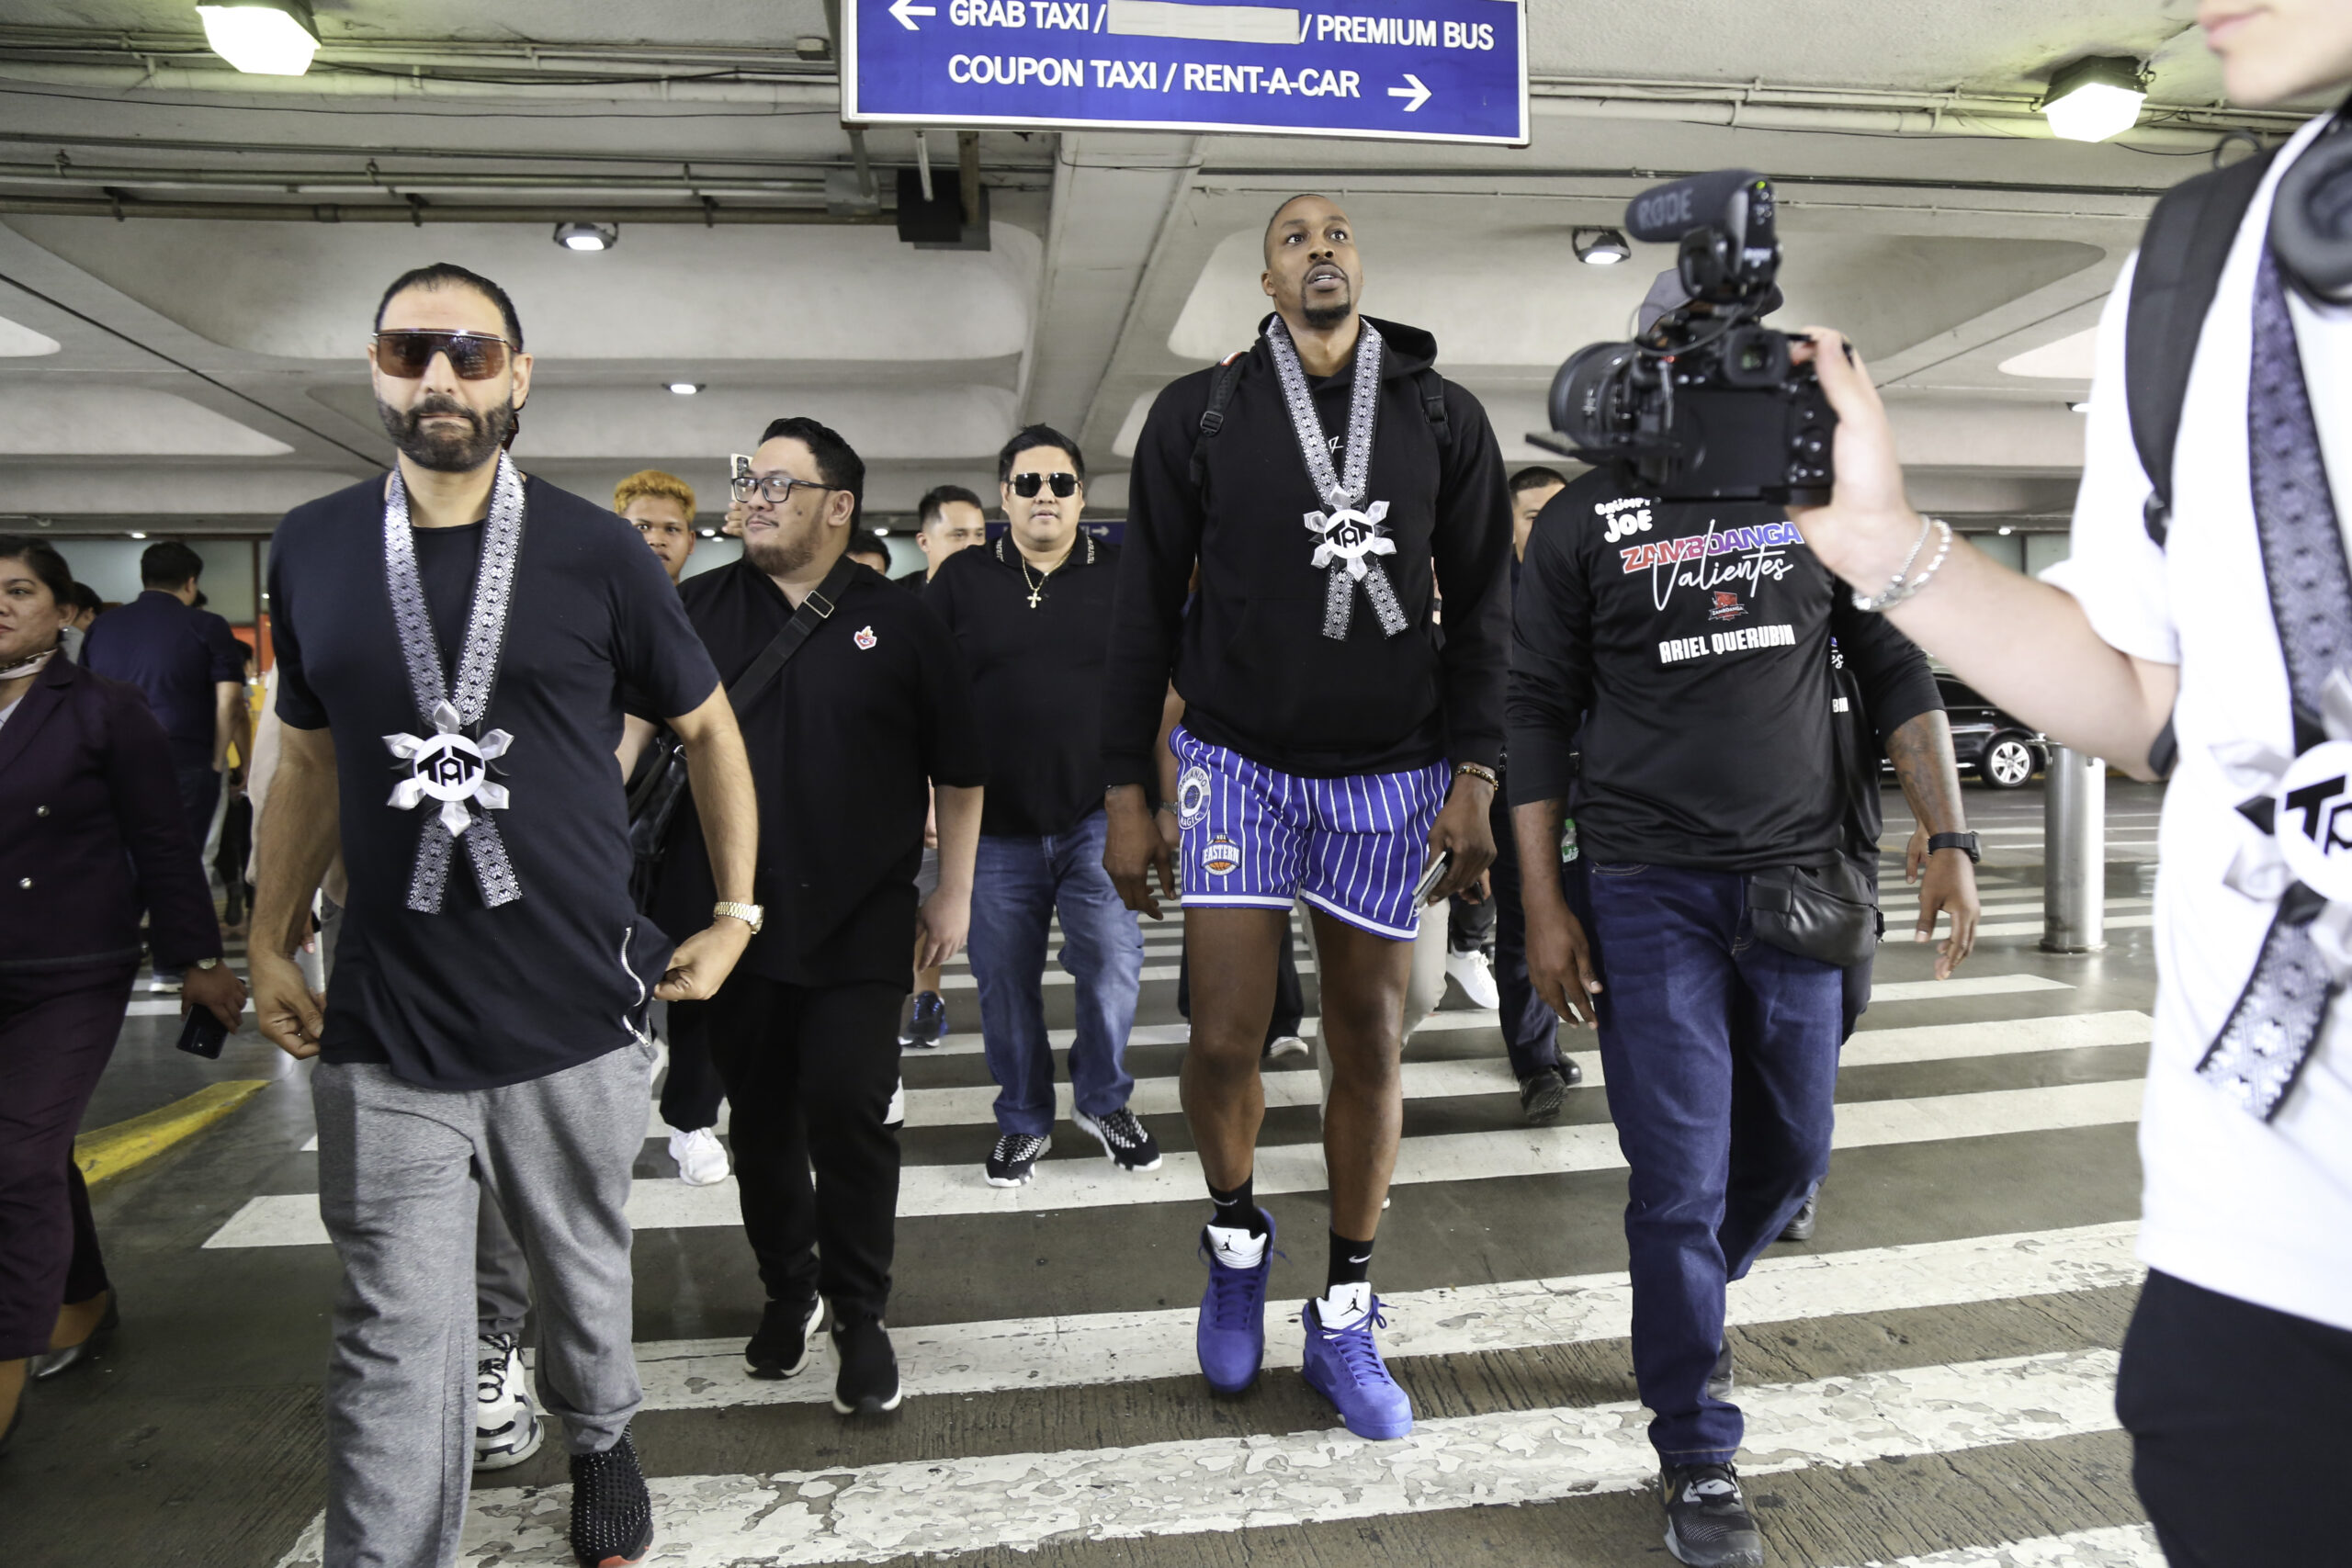 Former NBA player Dwight Howard arrives in the Philippines for a vacation